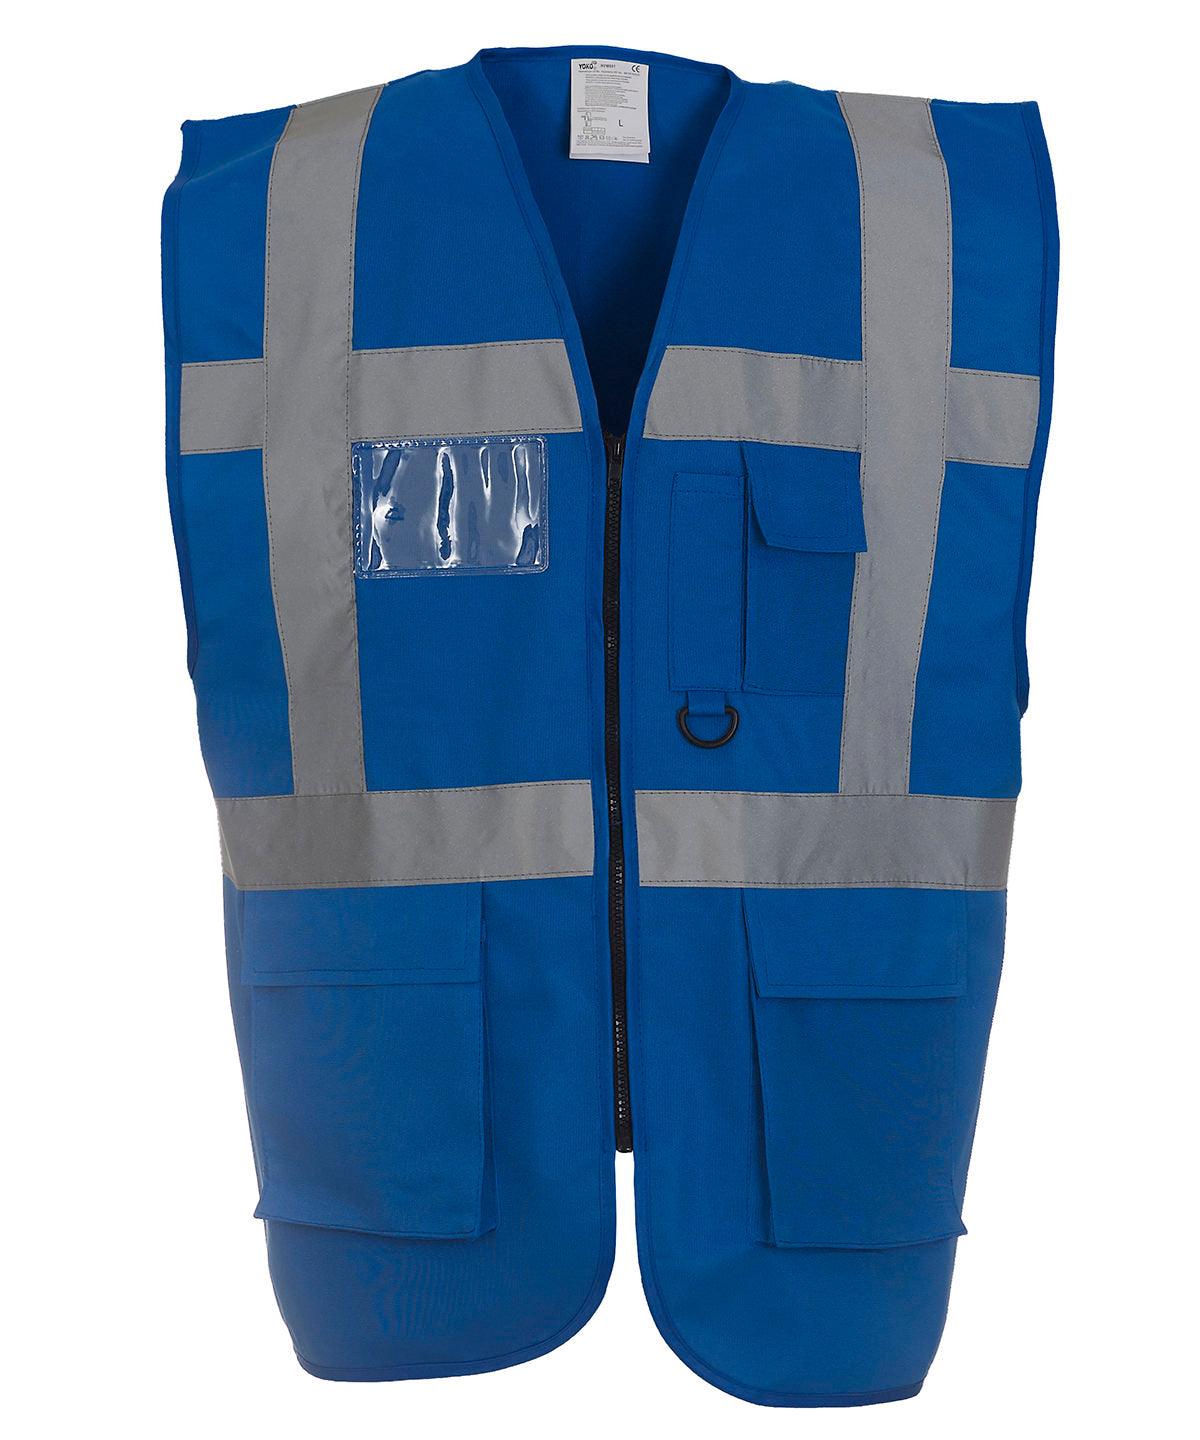 Royal Blue - Multifunctional executive hi-vis waistcoat (HVW801) Safety Vests Yoko Must Haves, Personal Protection, Plus Sizes, Safety Essentials, Safetywear, Workwear Schoolwear Centres